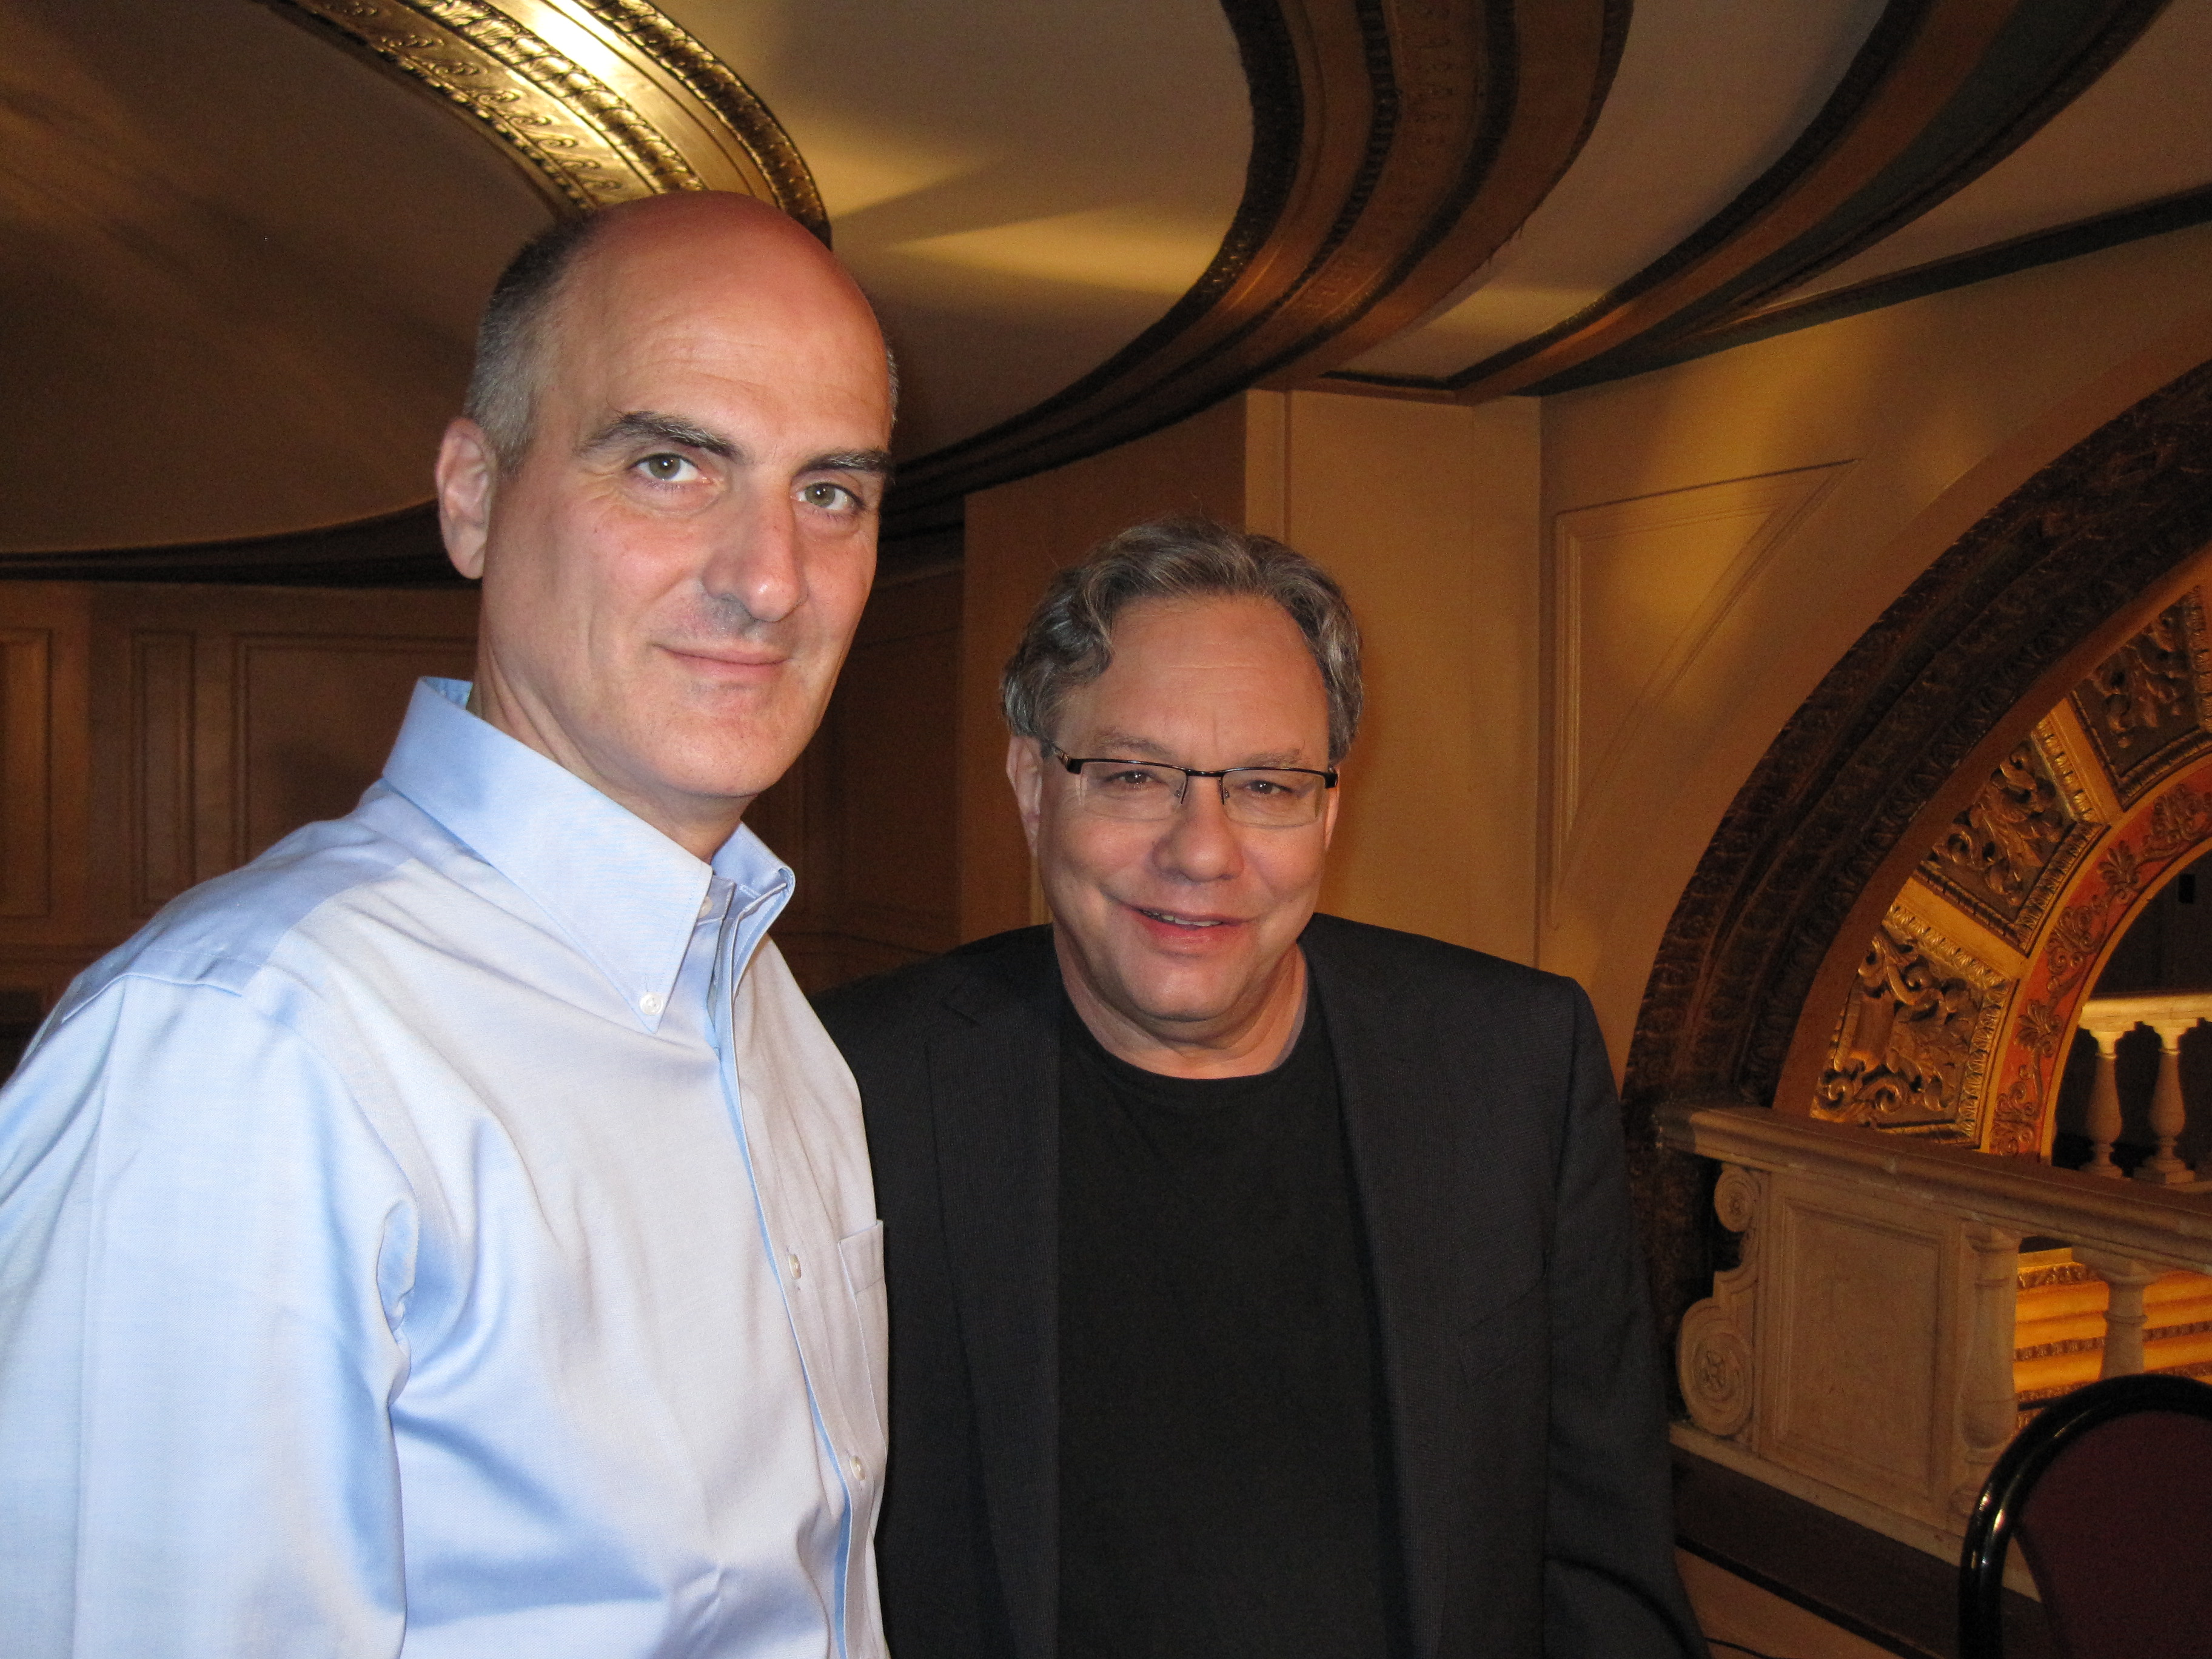 Jack Gulick, Producer and Lewis Black at The Fillmore in Detroit Filming STARK RAVING BLACK.